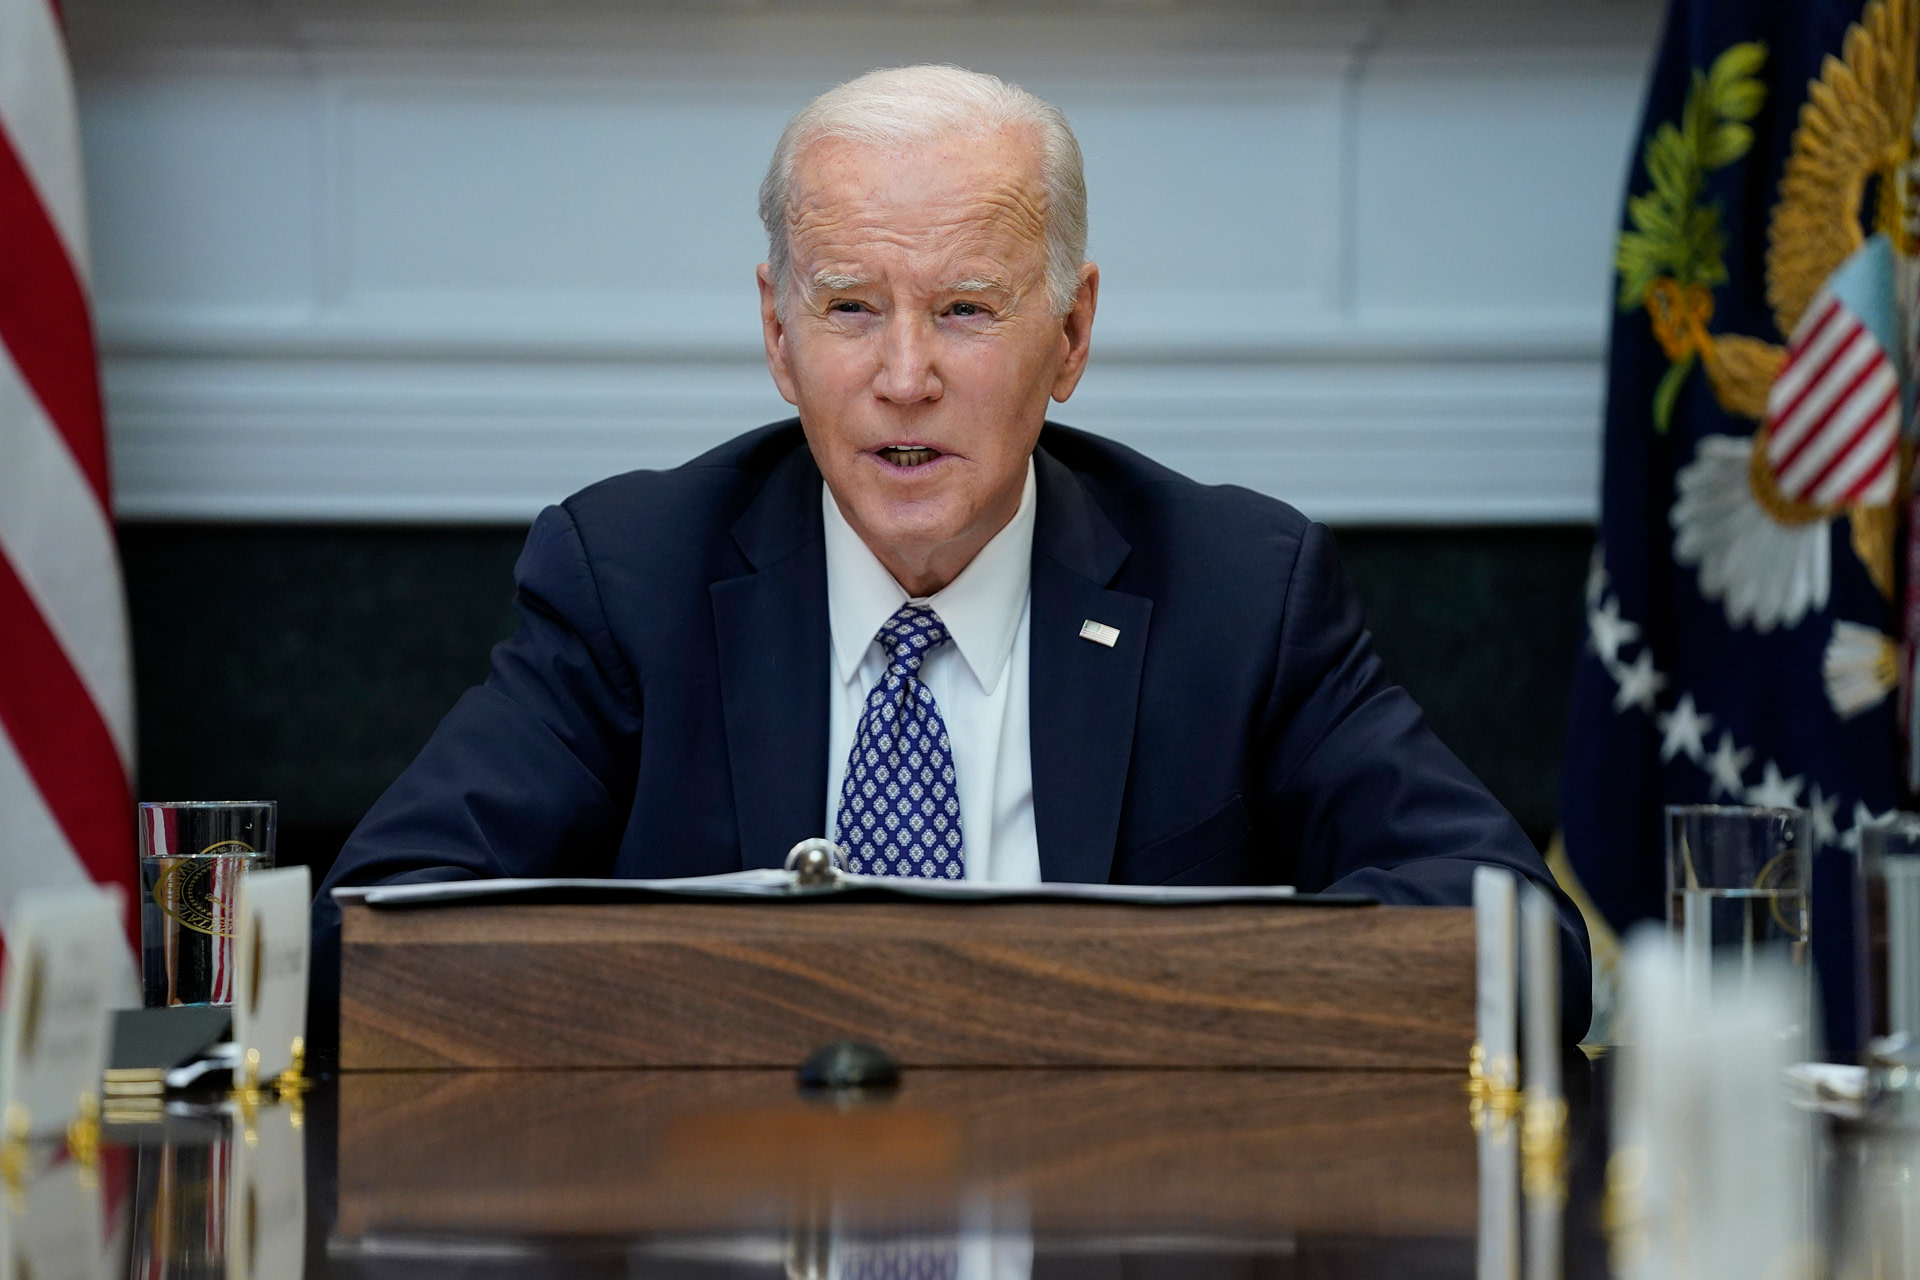 Biden’s approval rating hits new low